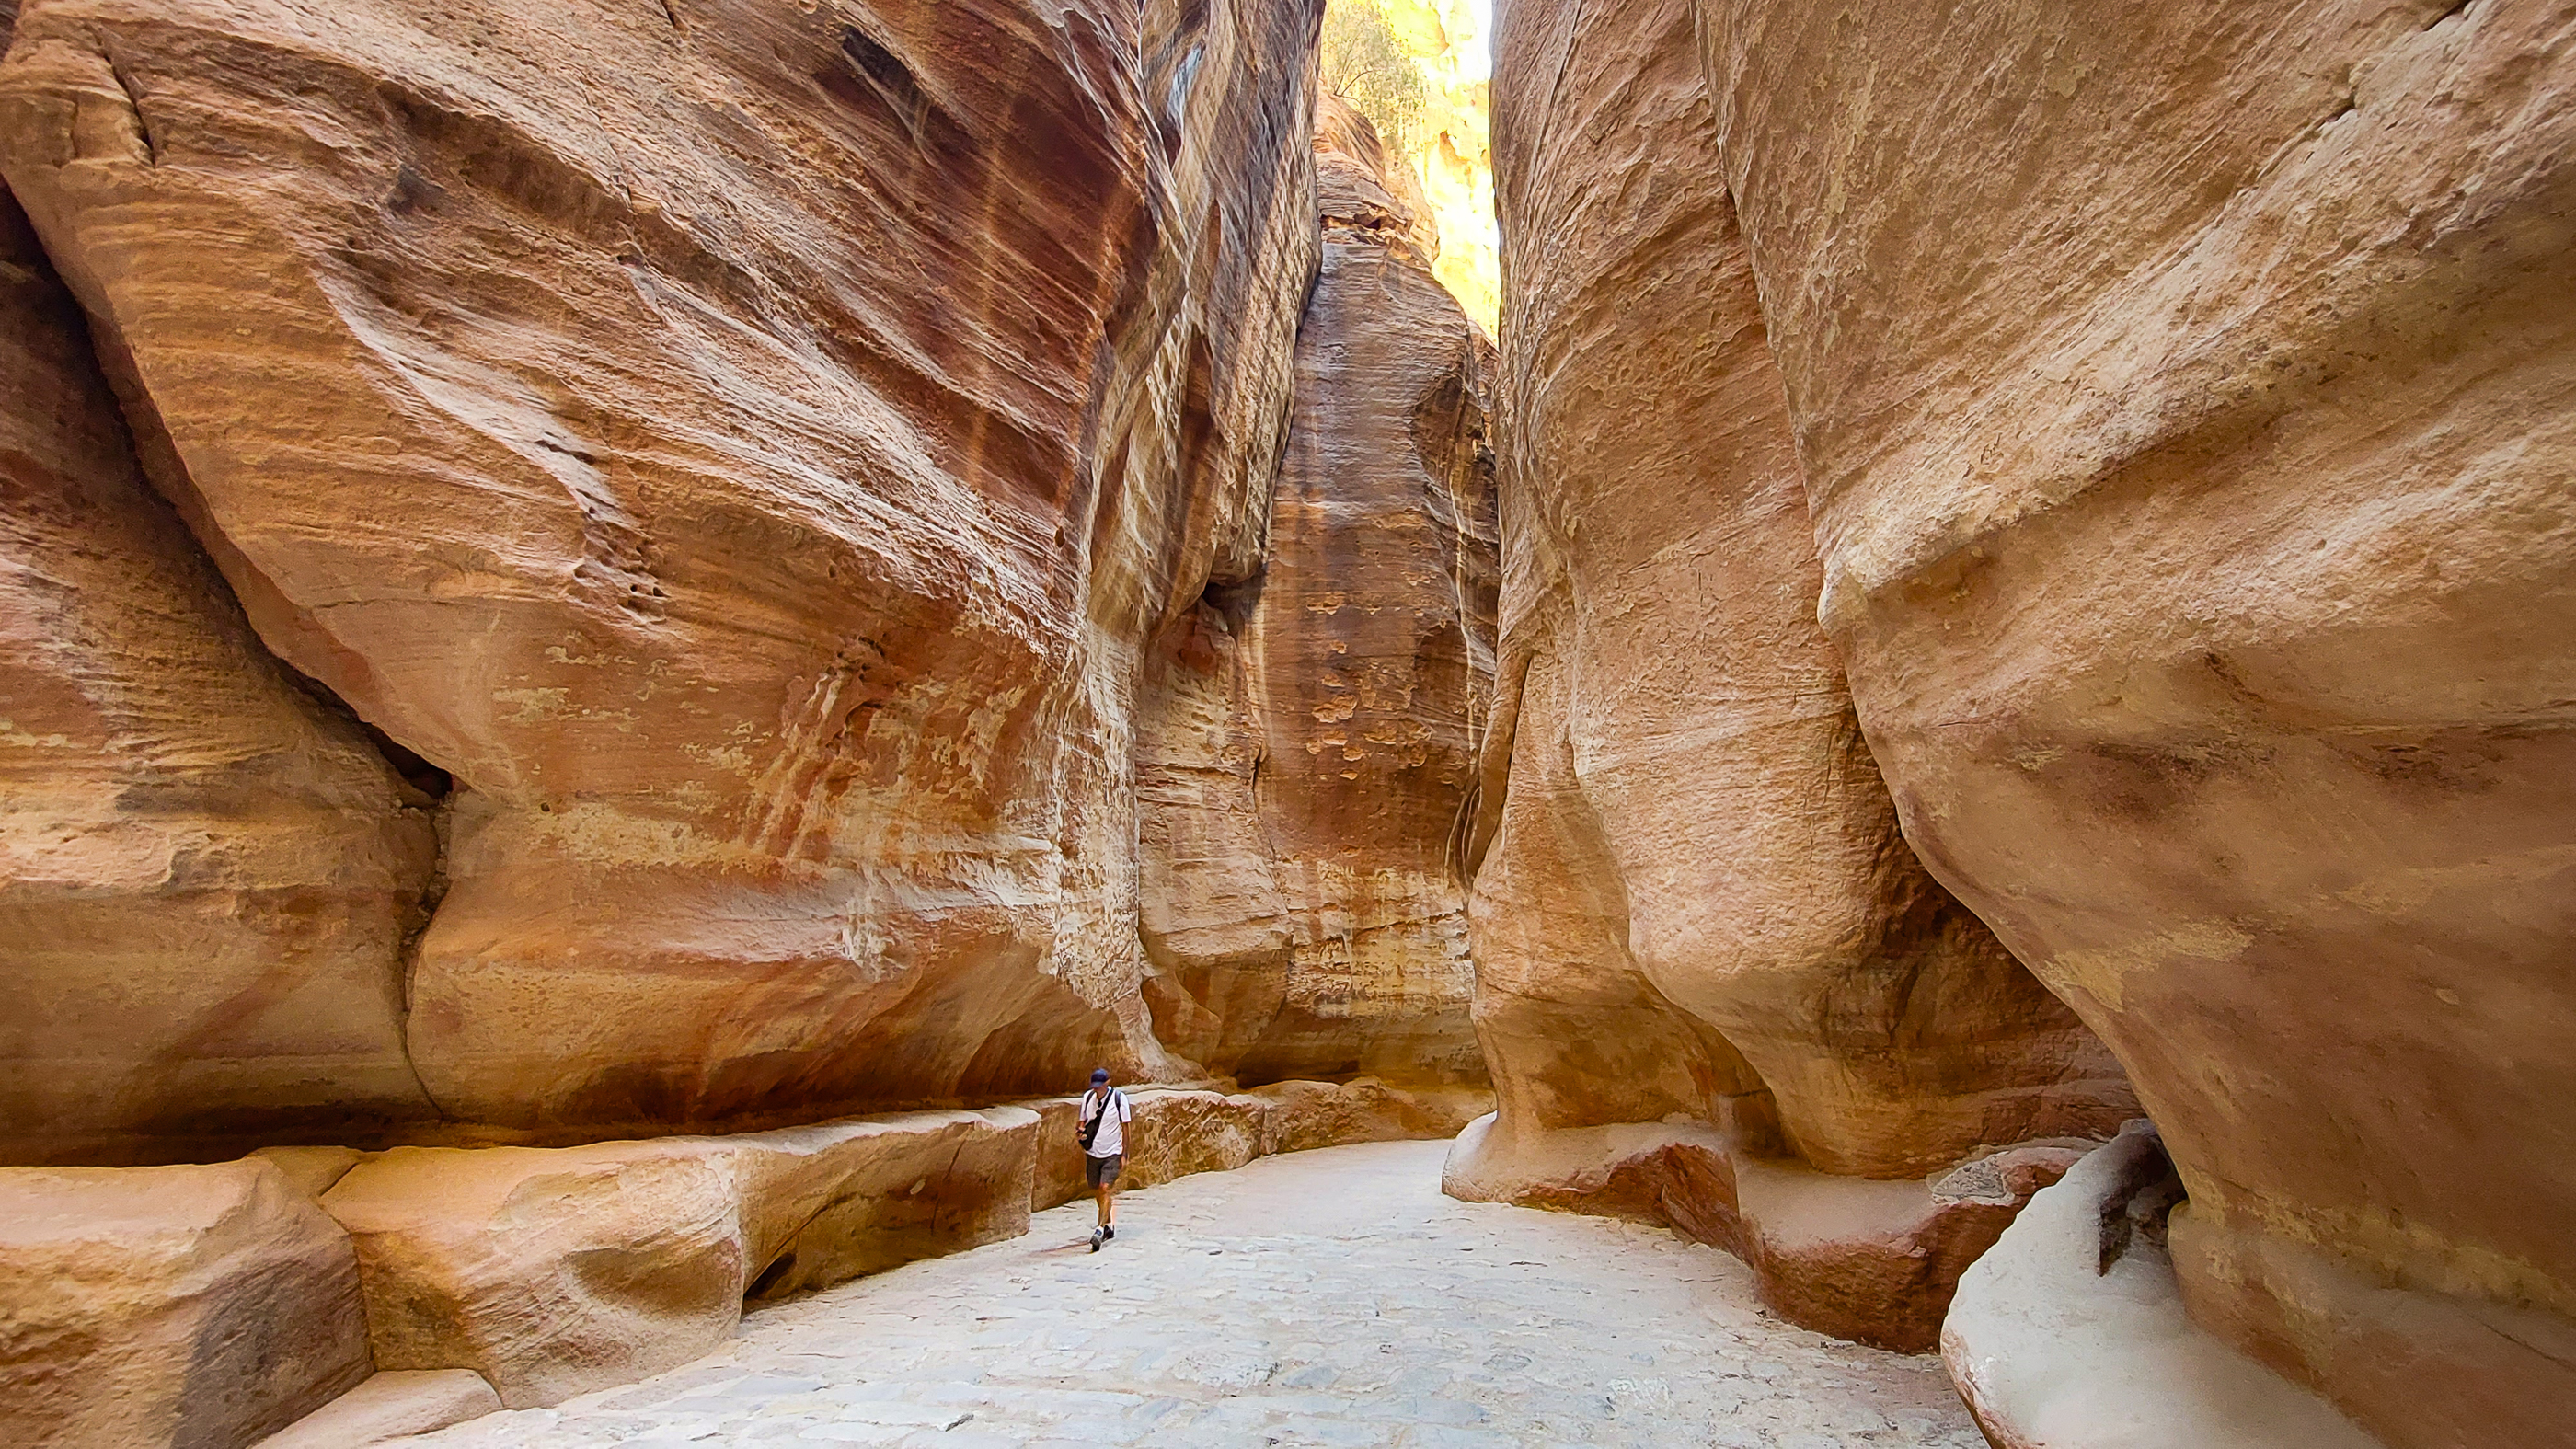 <span  class="uc_style_uc_tiles_grid_image_elementor_uc_items_attribute_title" style="color:#ffffff;">To arrive at Petra it is necessary to walk through beautiful canyons.</span>